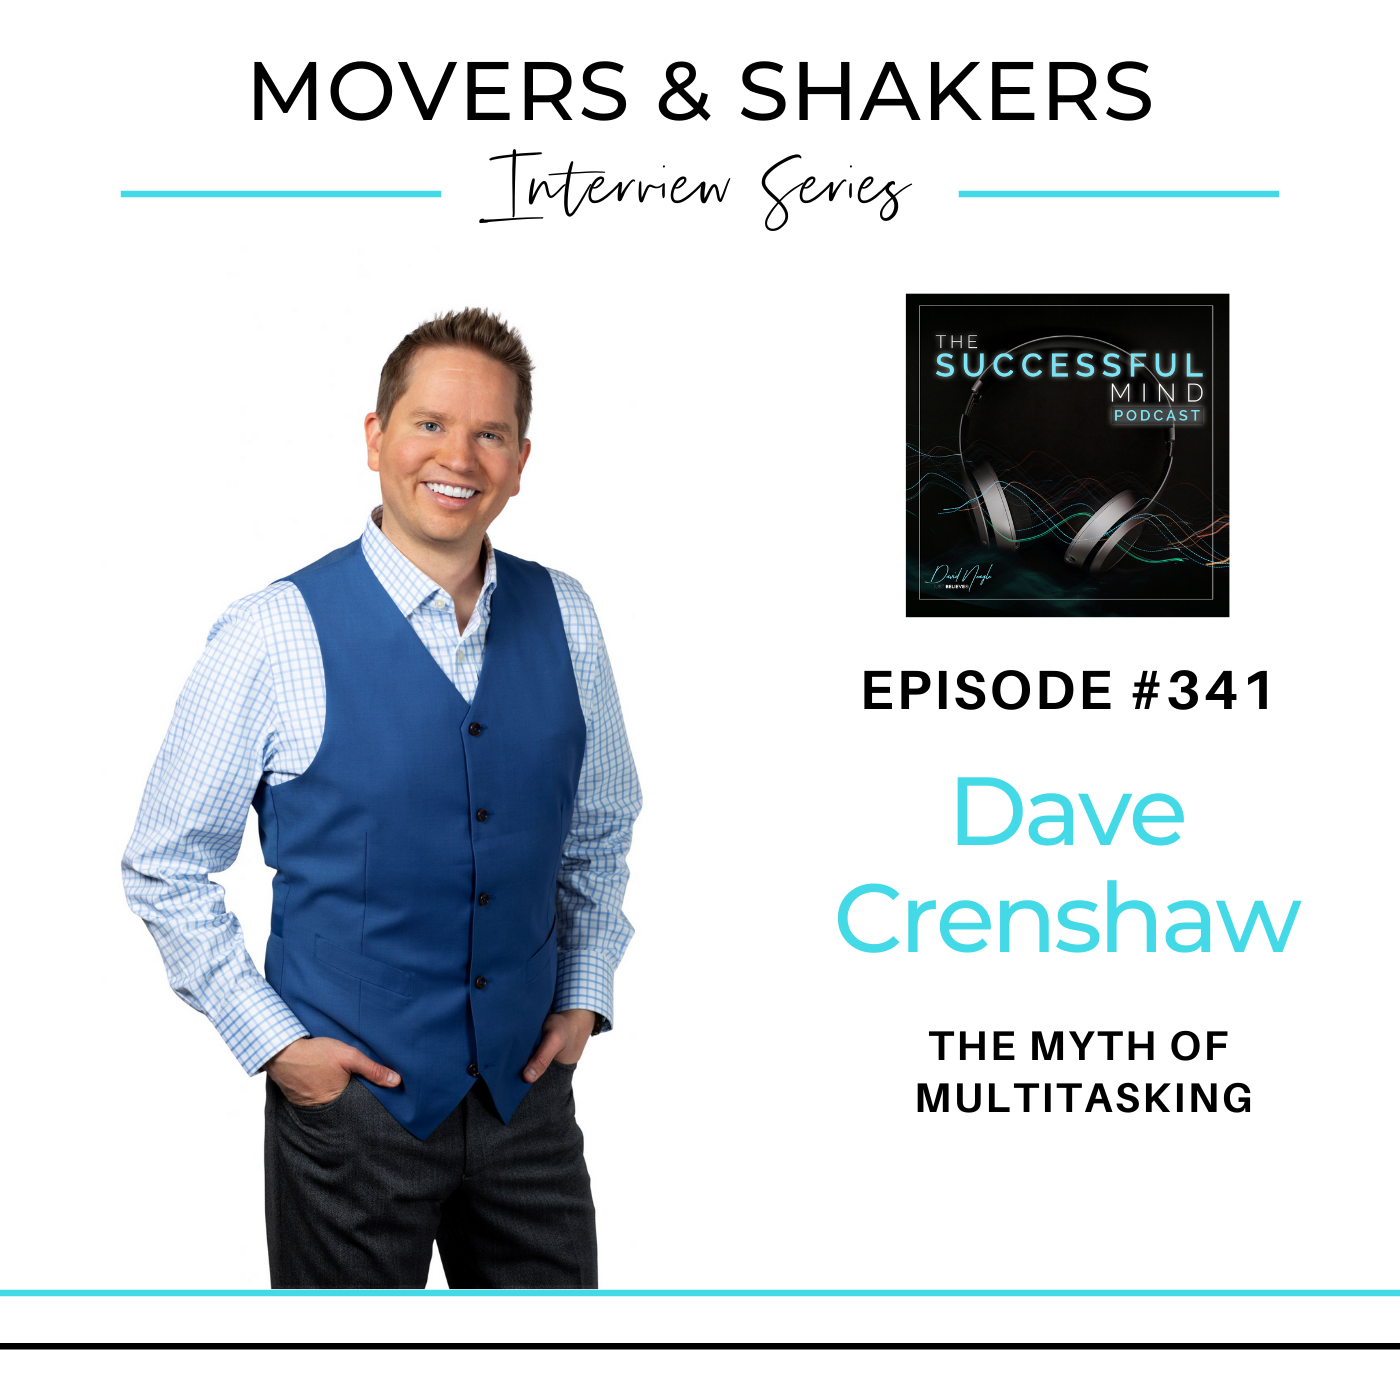 Movers & Shakers - Dave Crenshaw - The Myth of Multitasking